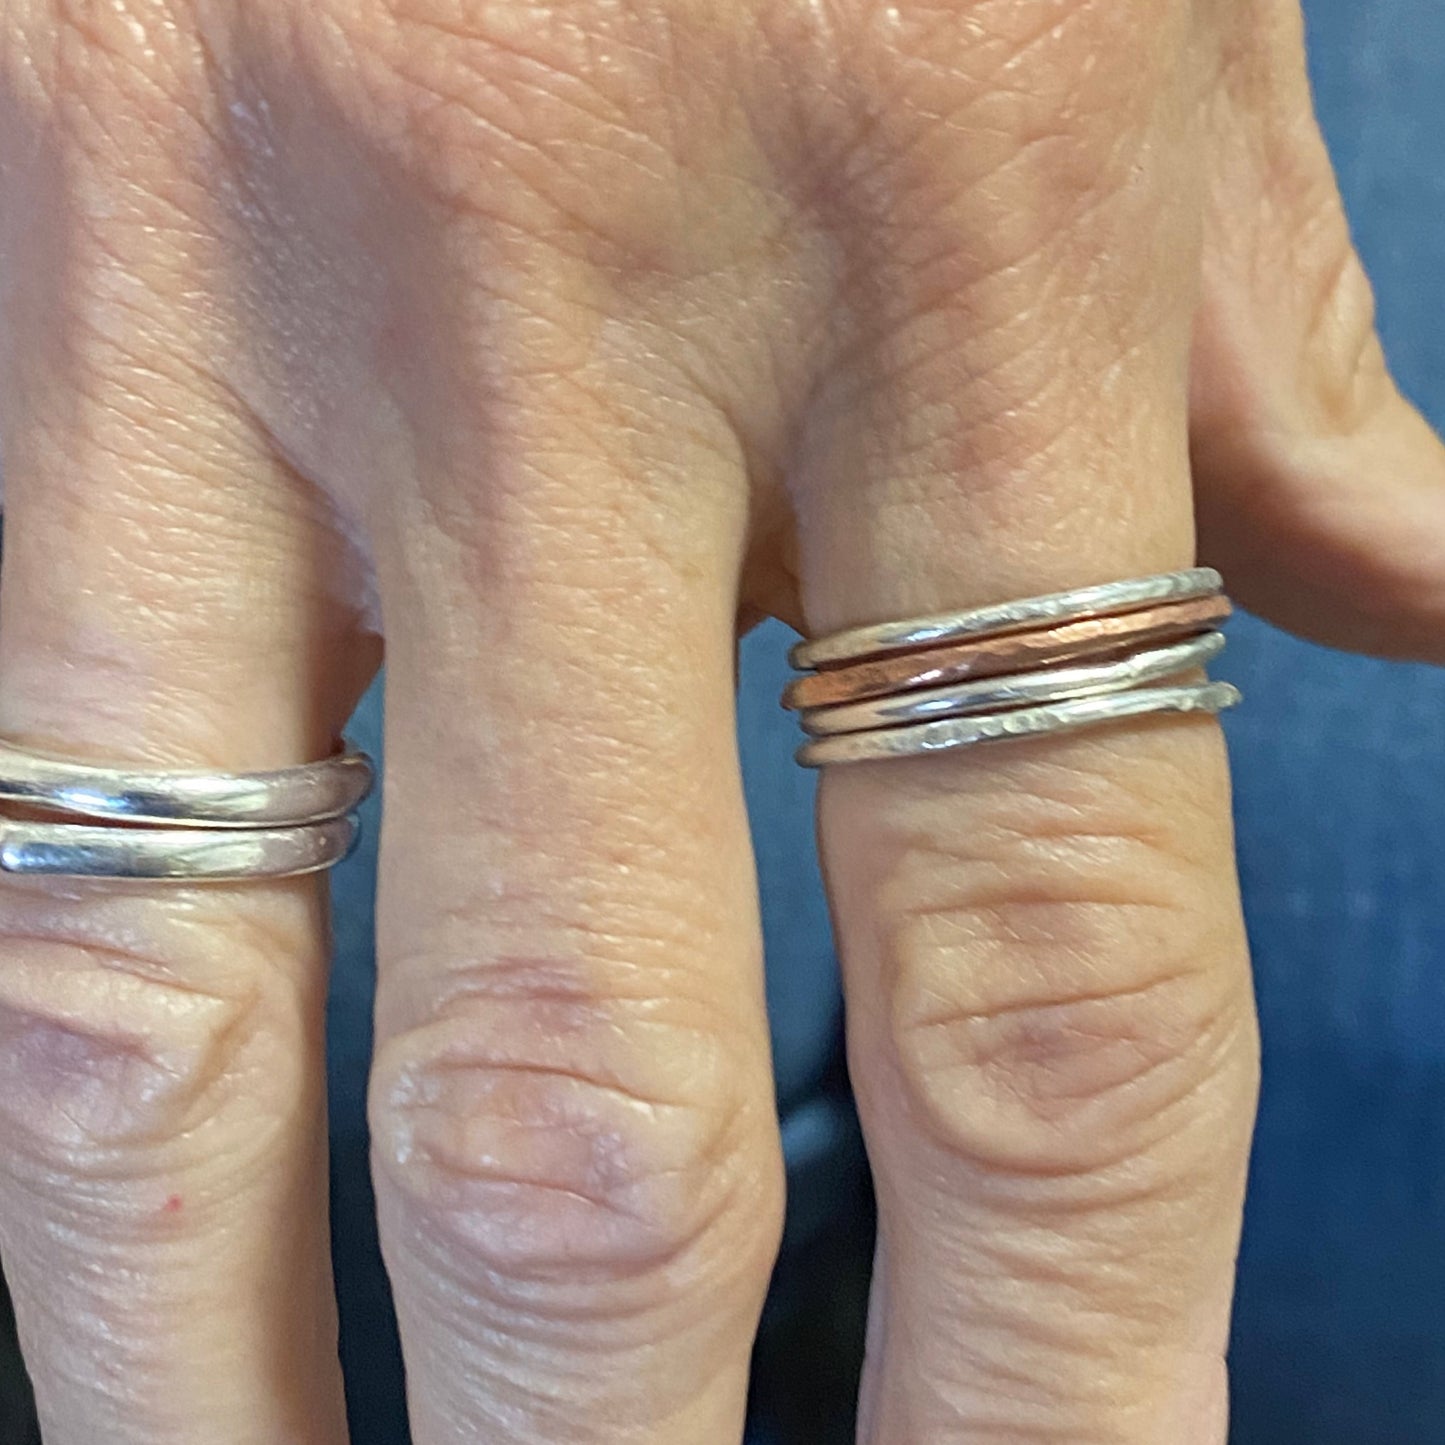 Silver Stacking Rings Workshop - Saturday 10th February 2024 1.30 -5pm